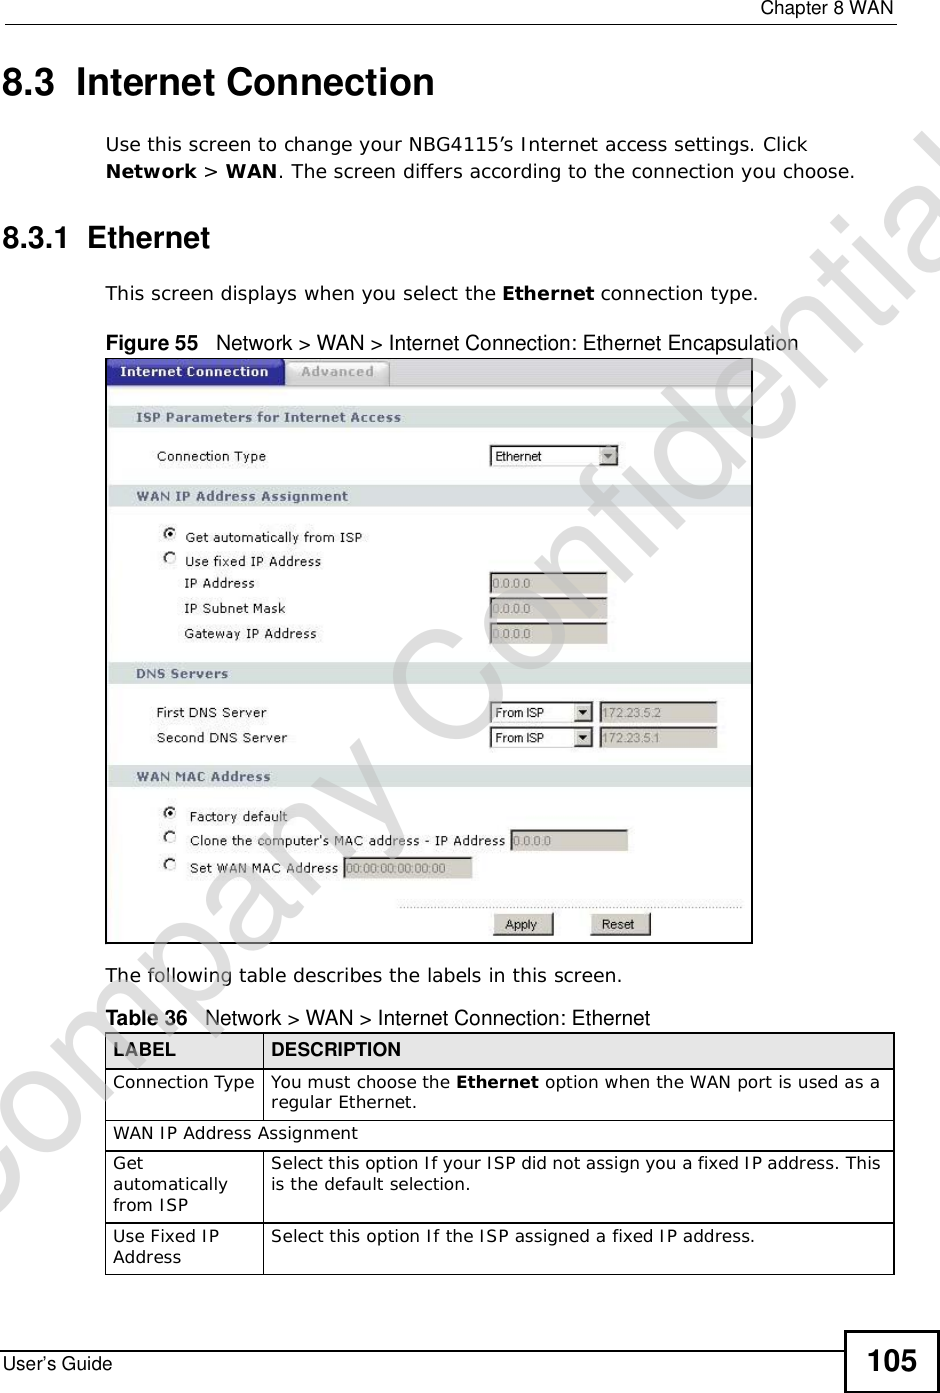  Chapter 8WANUser’s Guide 1058.3  Internet ConnectionUse this screen to change your NBG4115’s Internet access settings. Click Network &gt; WAN. The screen differs according to the connection you choose.8.3.1  EthernetThis screen displays when you select the Ethernet connection type.Figure 55   Network &gt; WAN &gt; Internet Connection: Ethernet EncapsulationThe following table describes the labels in this screen.Table 36   Network &gt; WAN &gt; Internet Connection: EthernetLABEL DESCRIPTIONConnection Type You must choose the Ethernet option when the WAN port is used as a regular Ethernet.WAN IP Address Assignment Getautomatically from ISP Select this option If your ISP did not assign you a fixed IP address. This is the default selection. Use Fixed IP Address Select this option If the ISP assigned a fixed IP address. Company Confidential